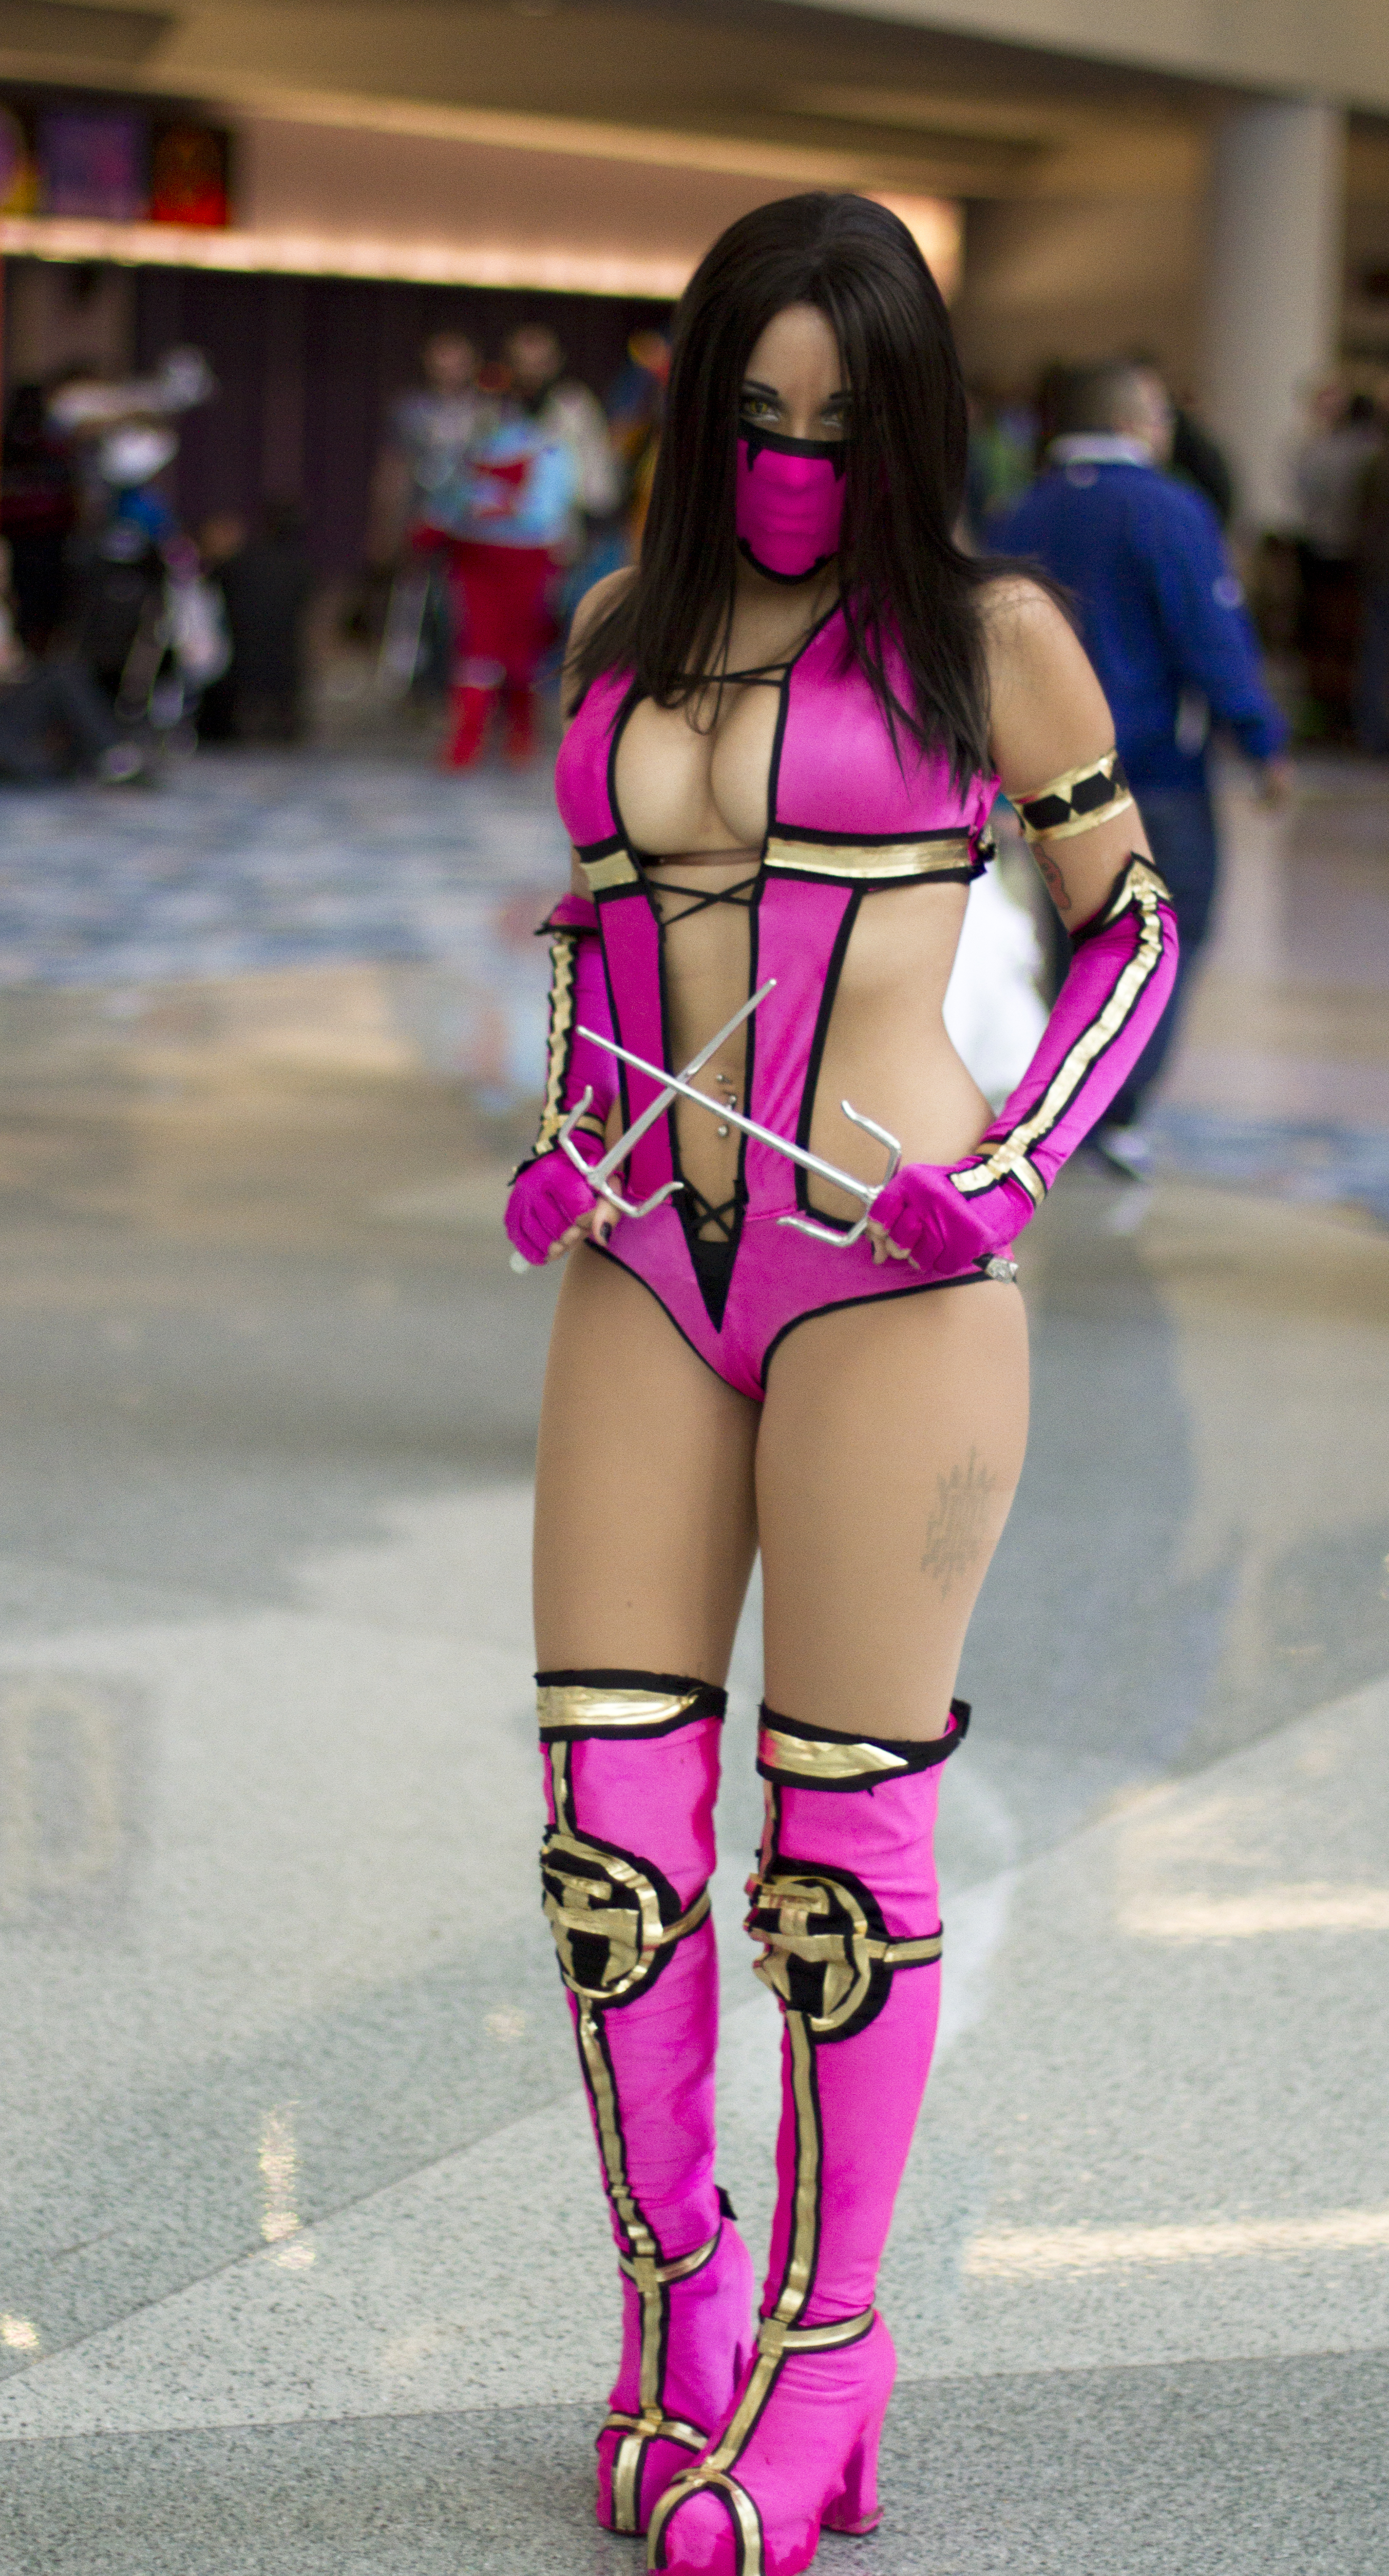 Sexy Cosplay Girl: Mortal Kombat..Hottest Cosplay sorted by. relevance. 